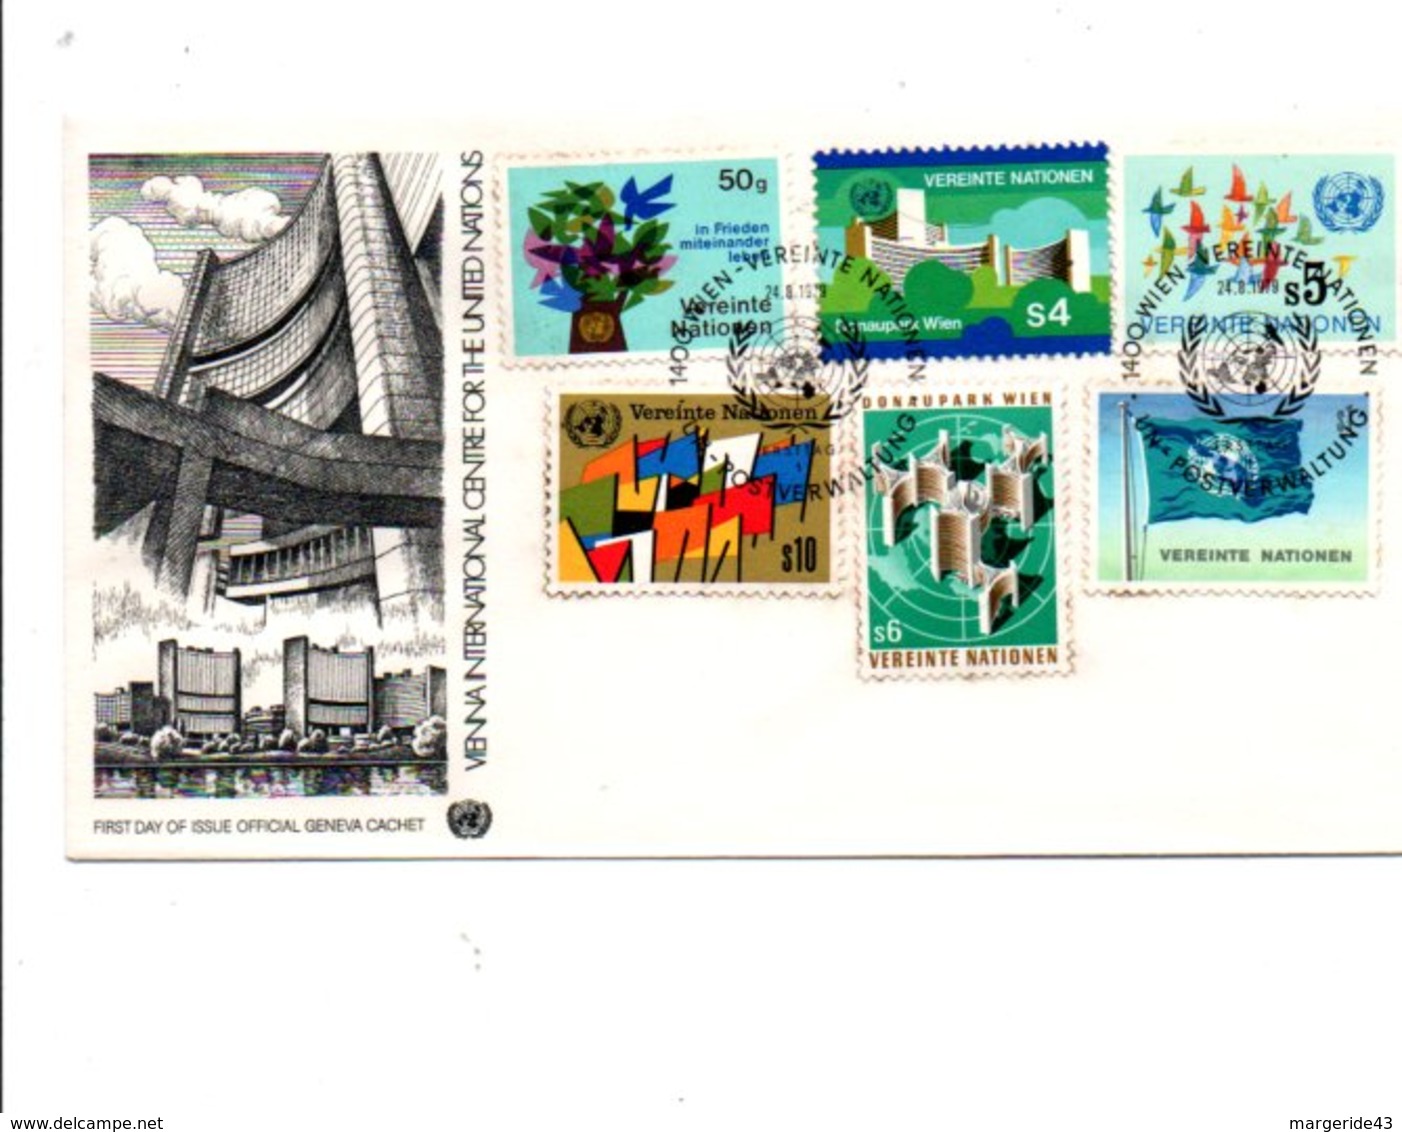 NATIONS UNIES VIENNE FDC 1979 - FDC